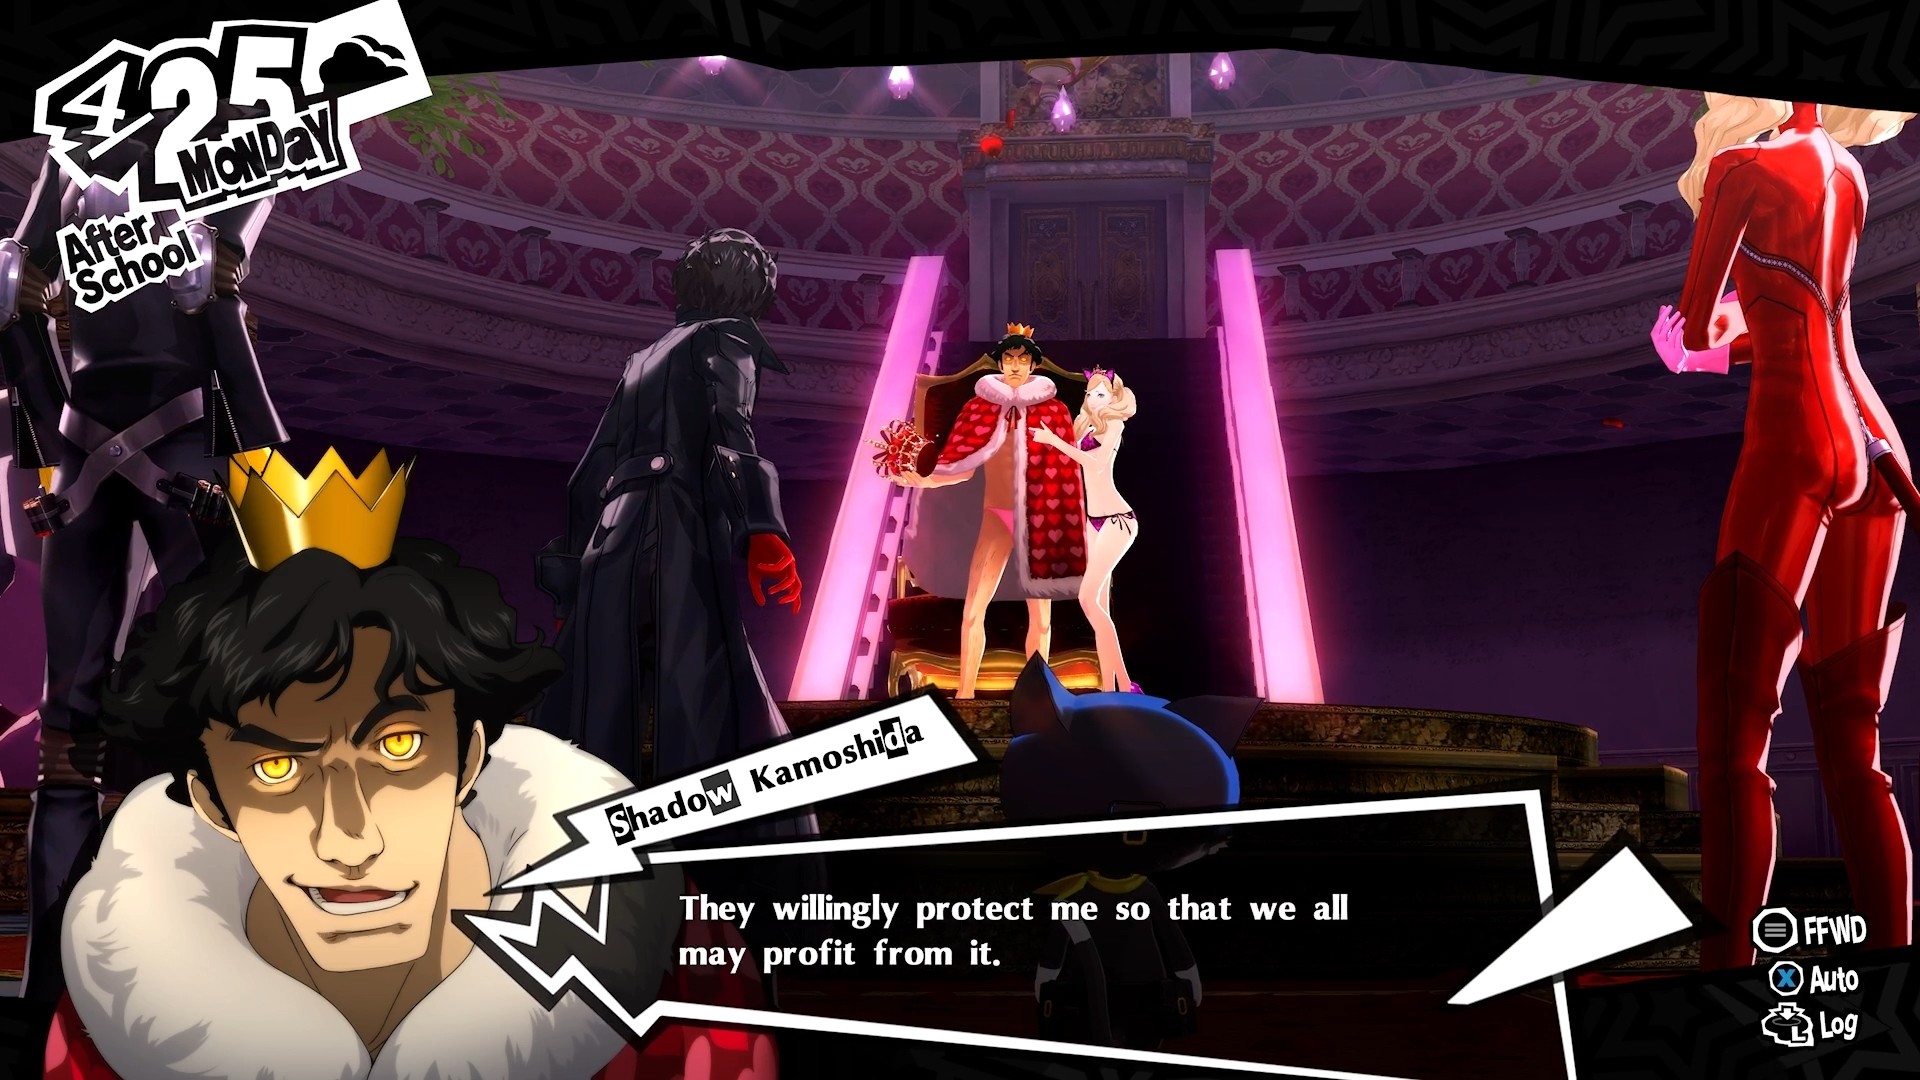 in Persona 5 Royal, Shadow Kamoshida faces off against the party.